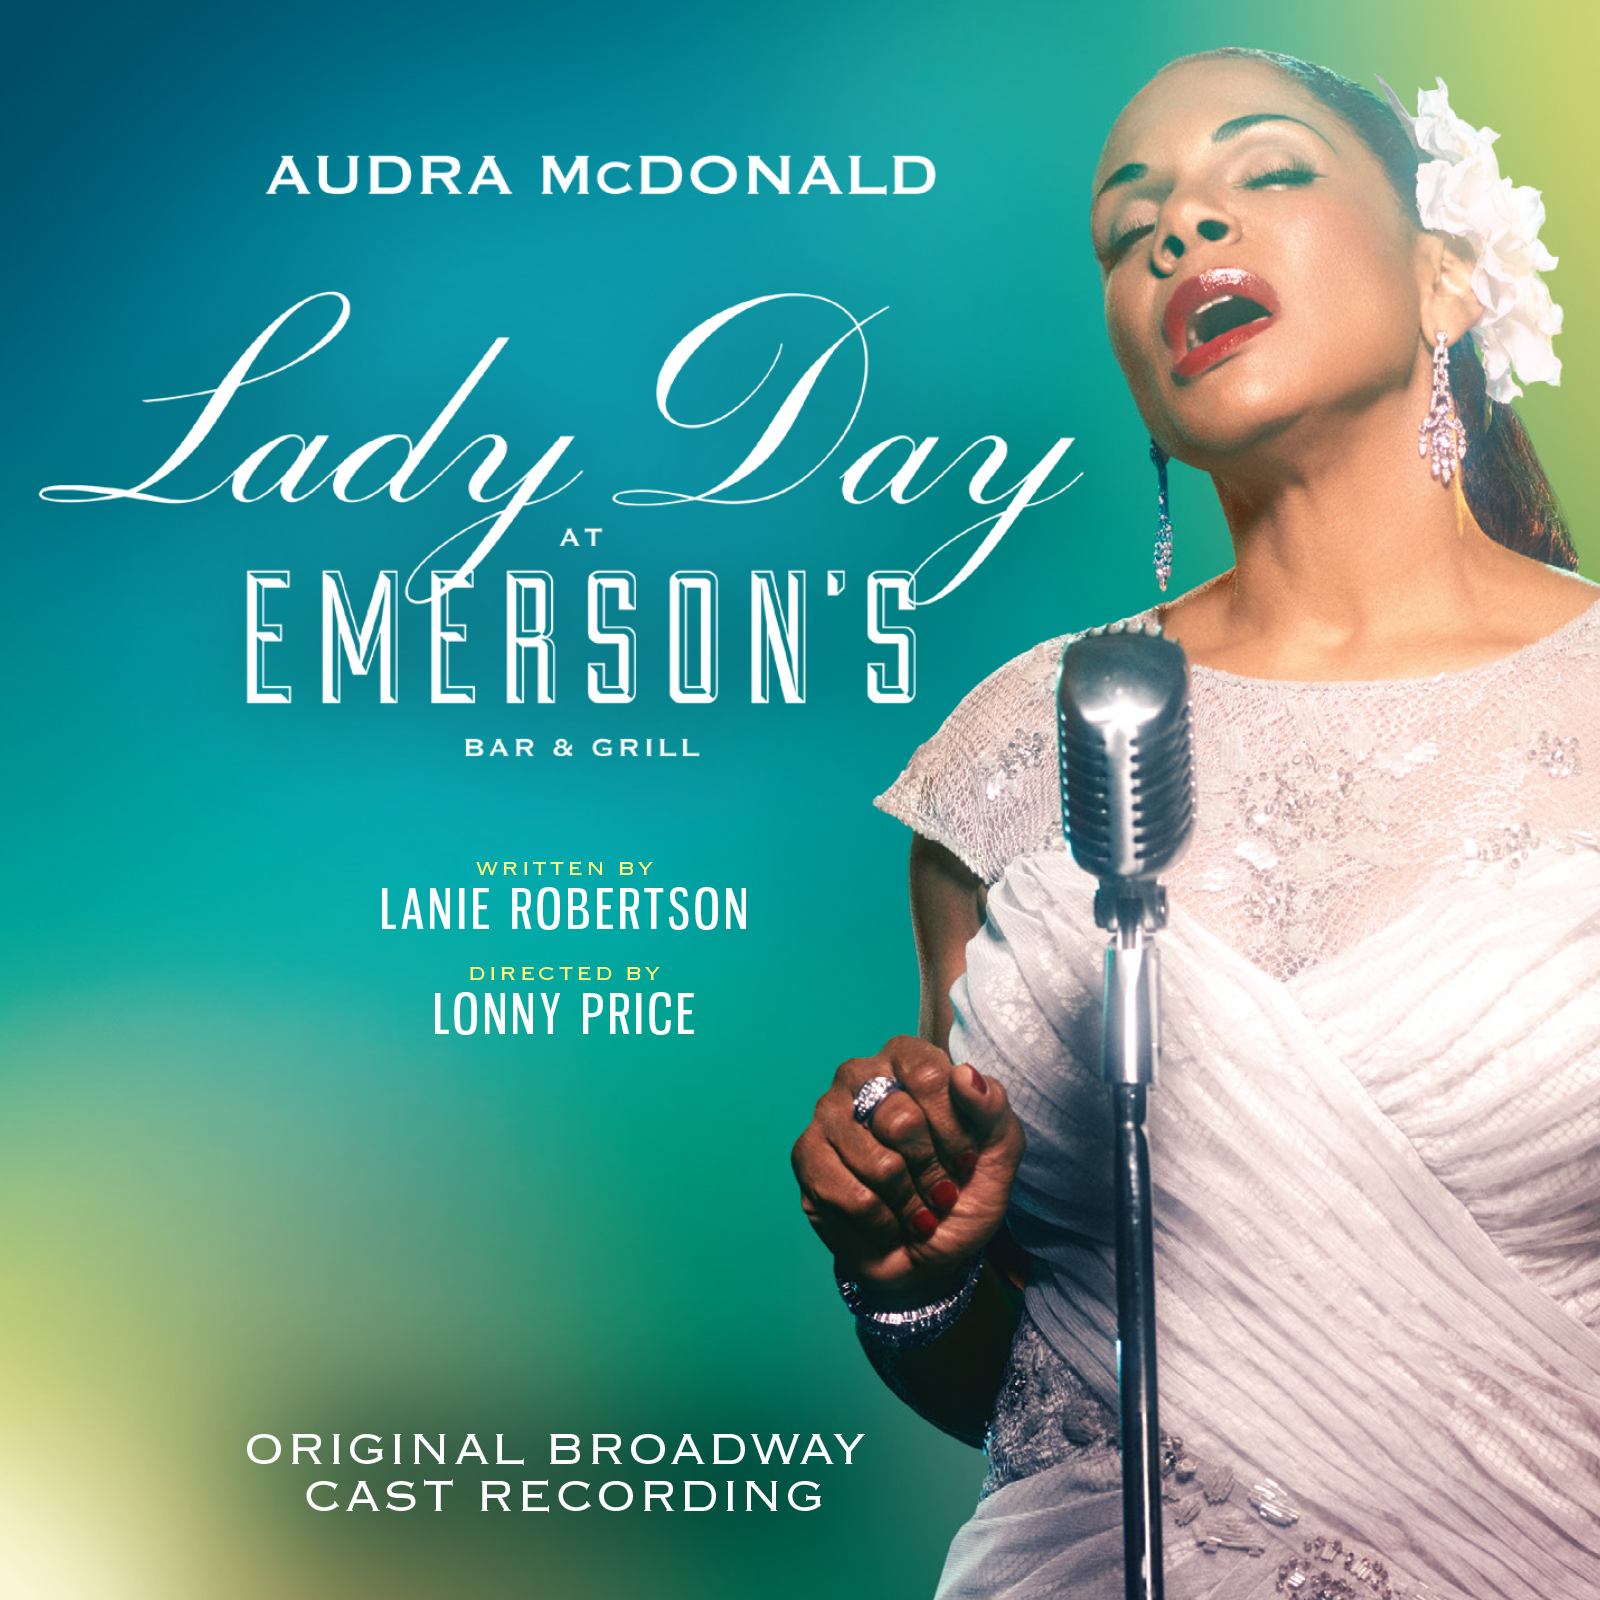 The album cover for the movie "Lady Day at Emerson's Bar & Grill" featuring Audra McDonald as Billie Holiday wearing a white dress, singing into an old style microphone.